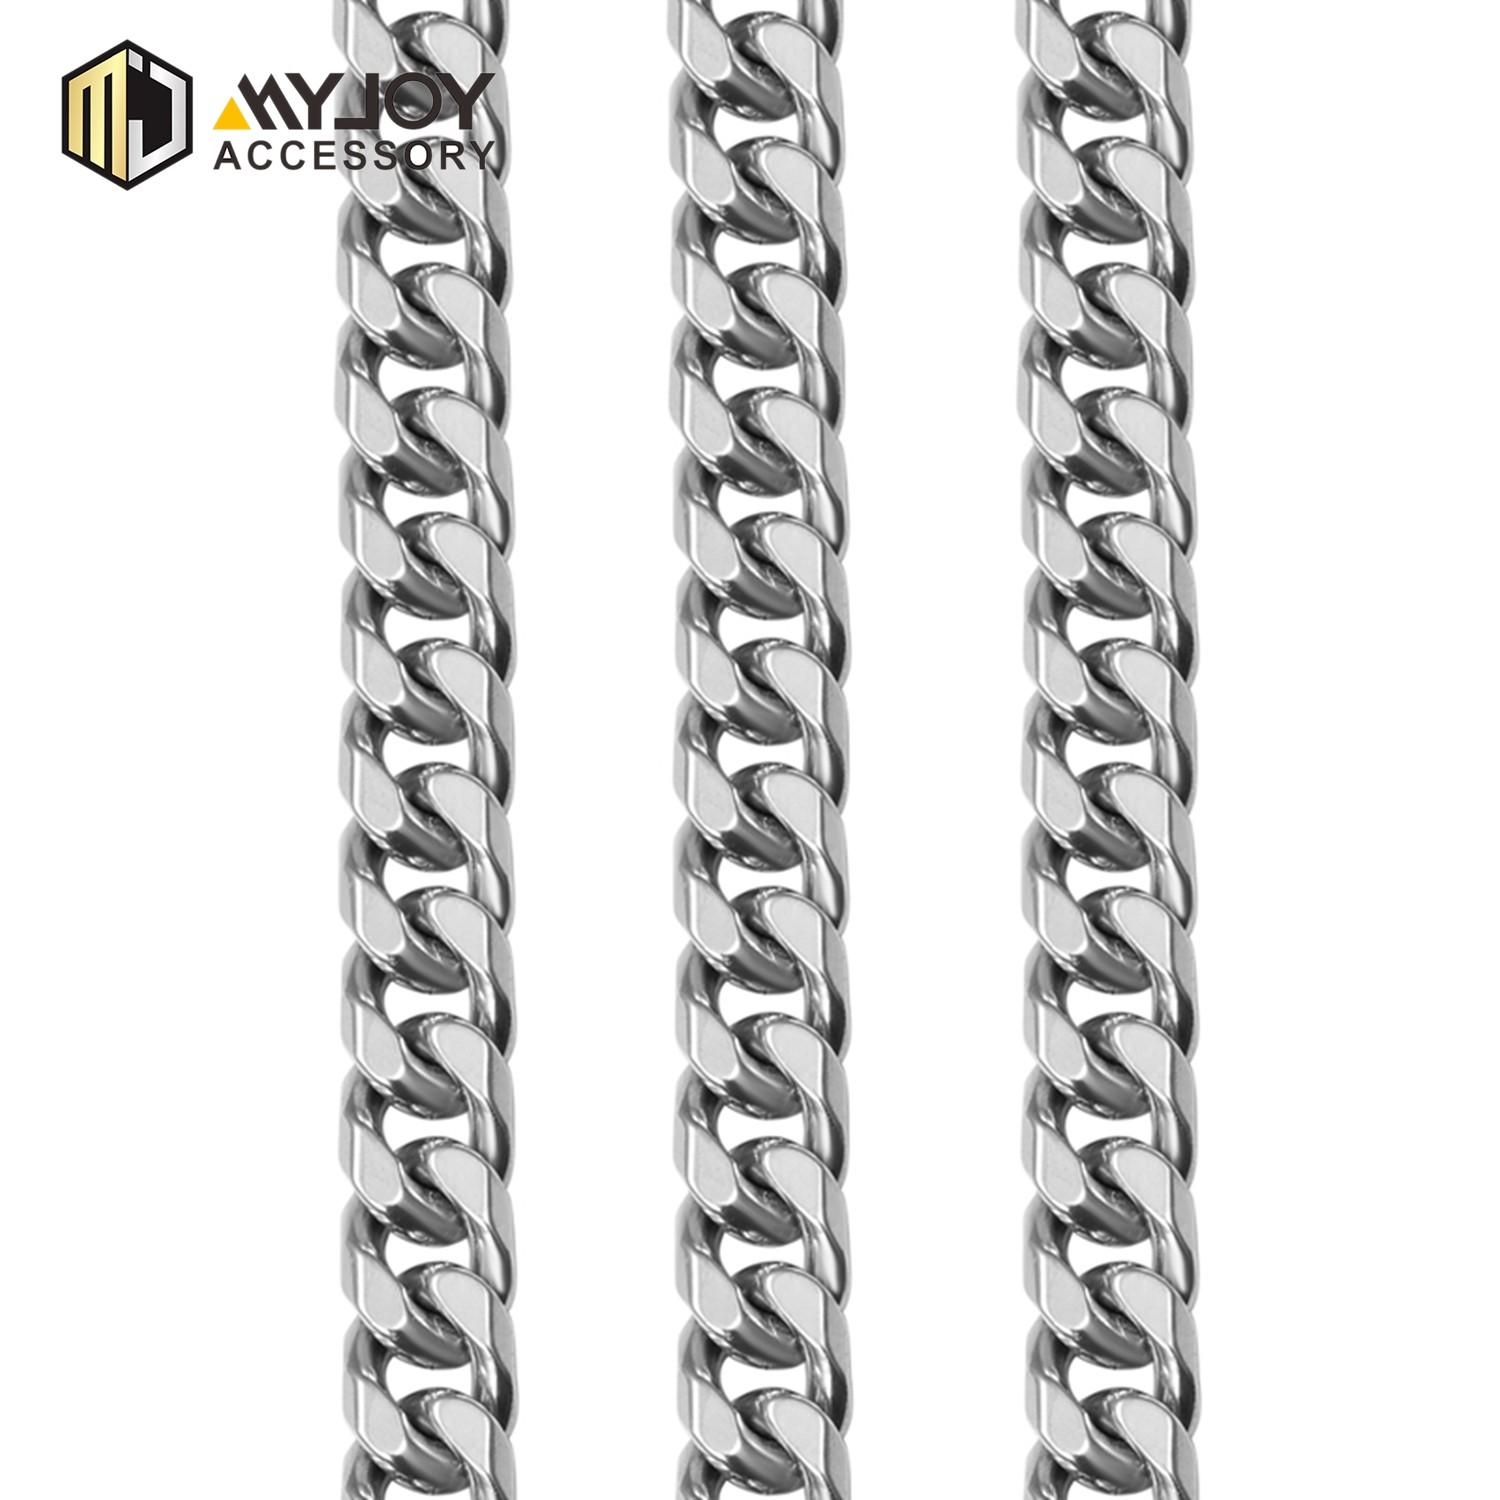 MYJOY Wholesale strap chain Suppliers for handbag-2